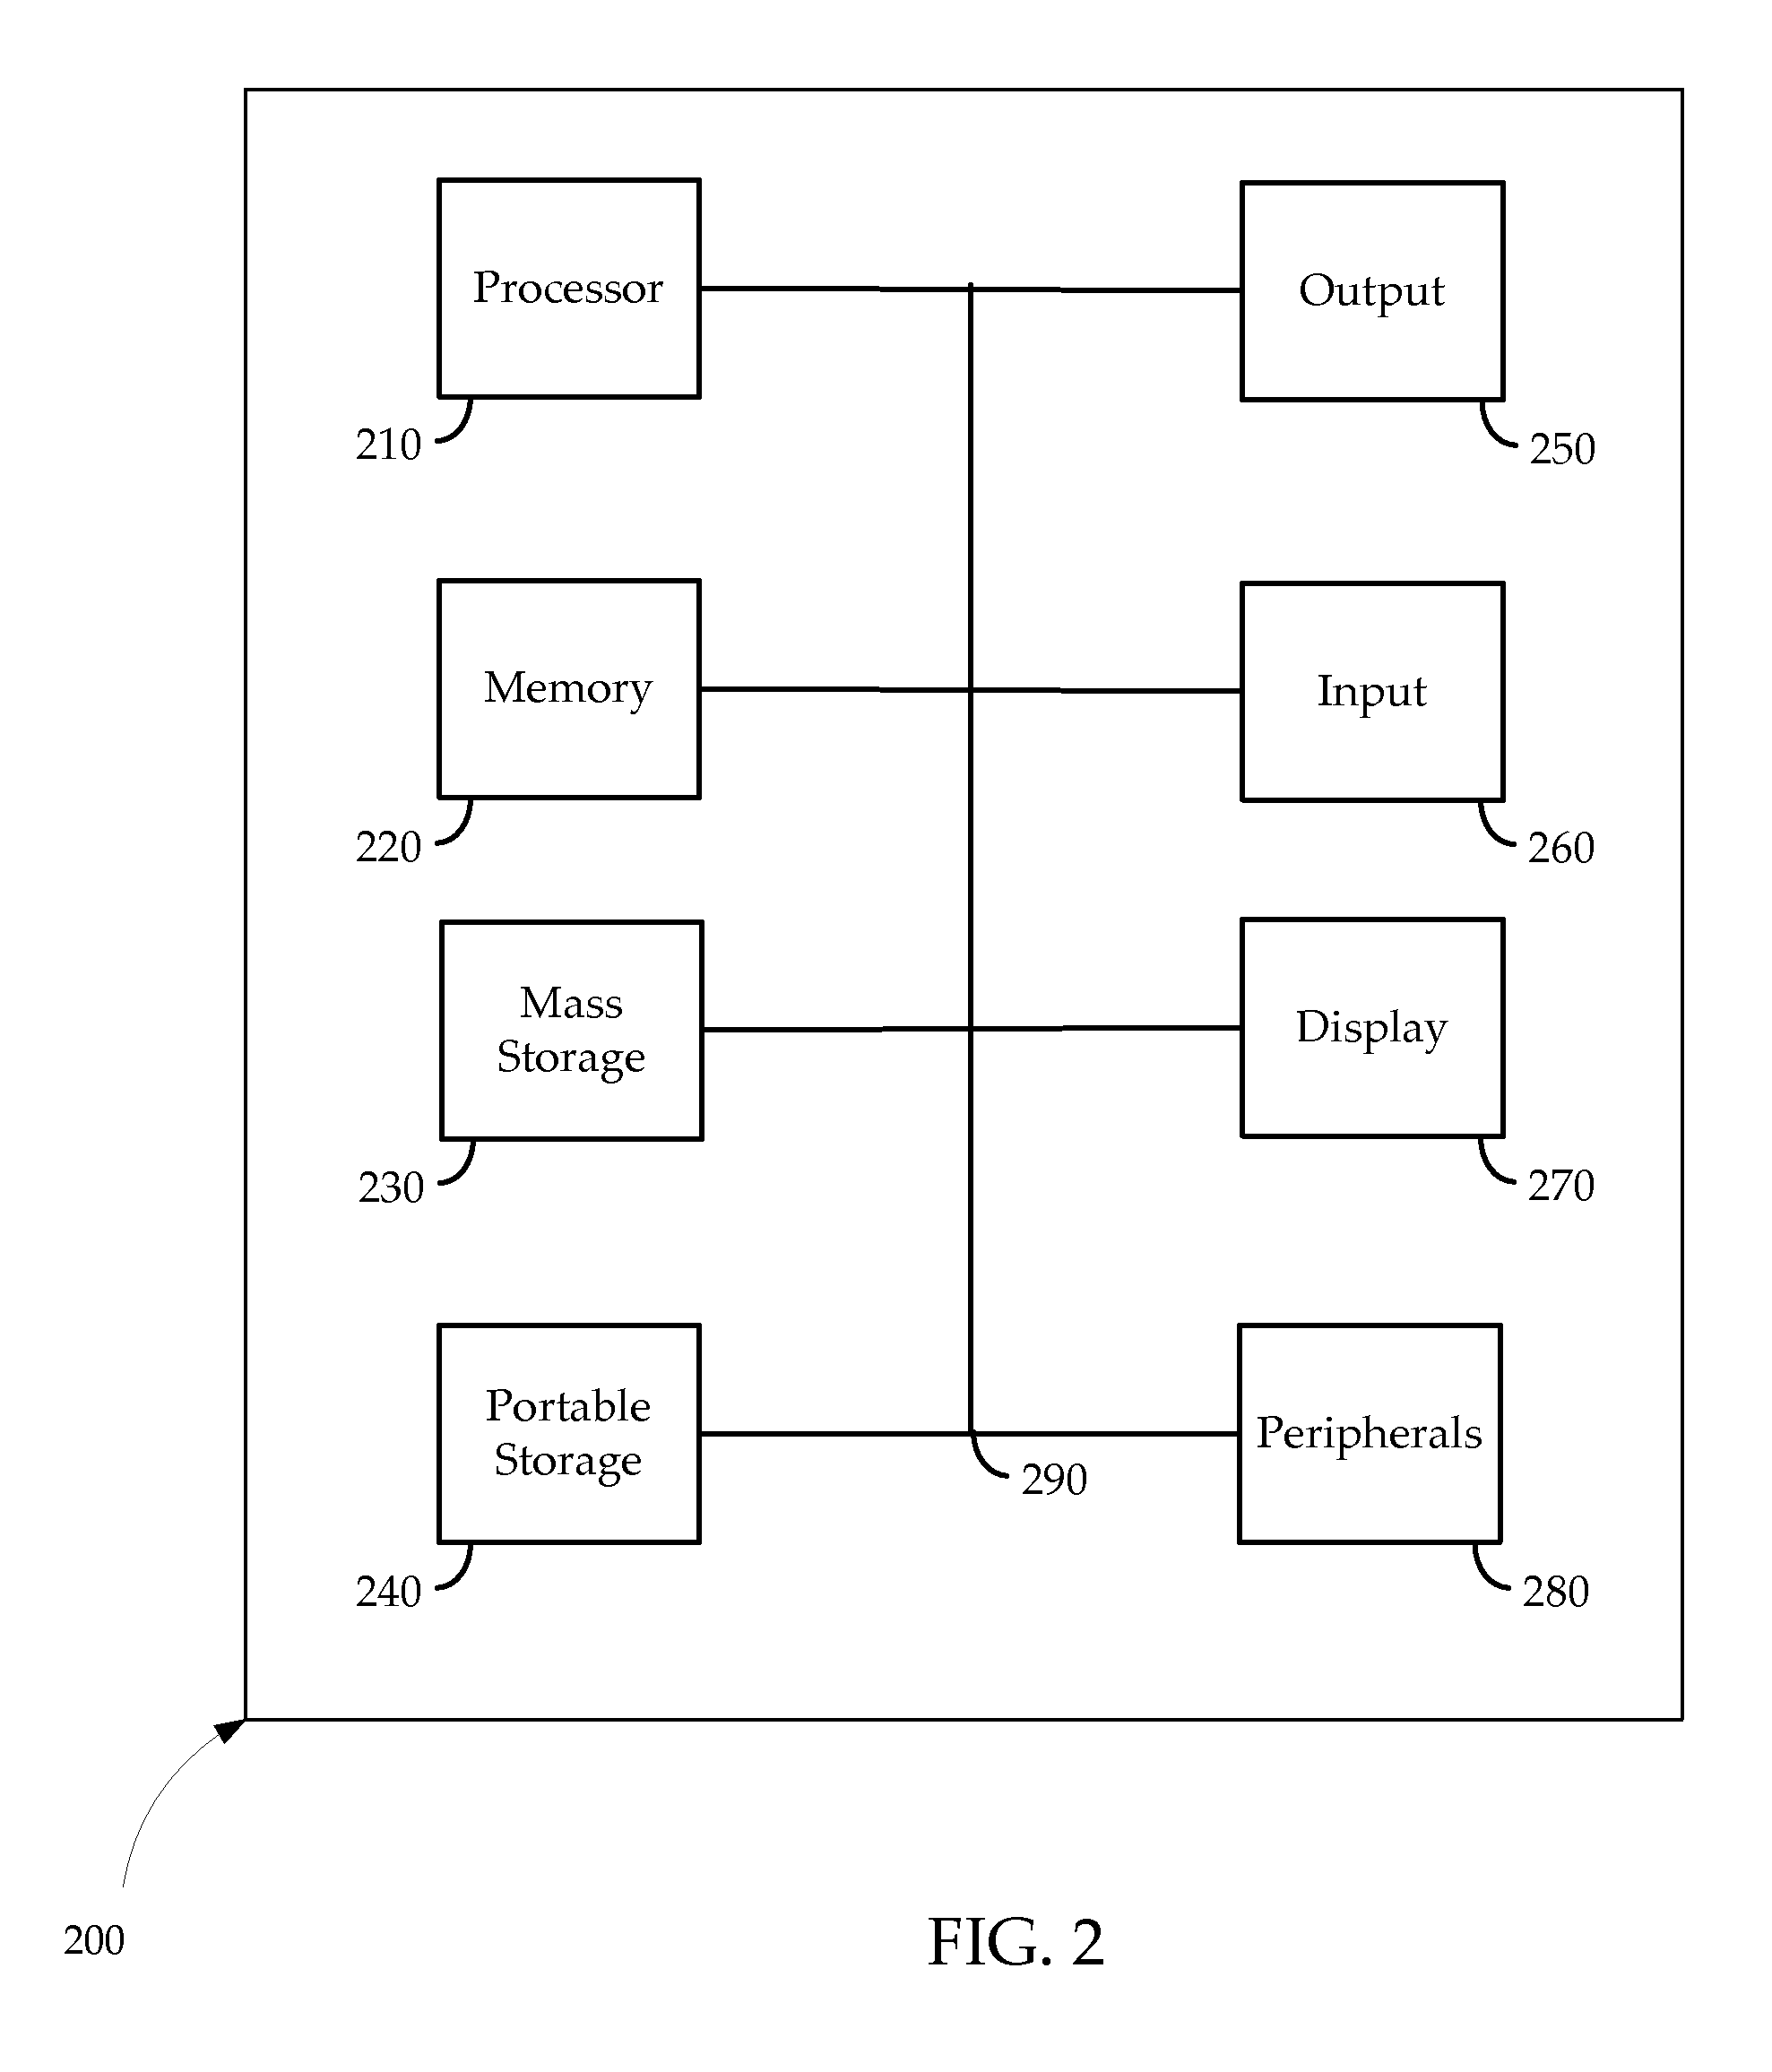 Systems and methods for predictive coding